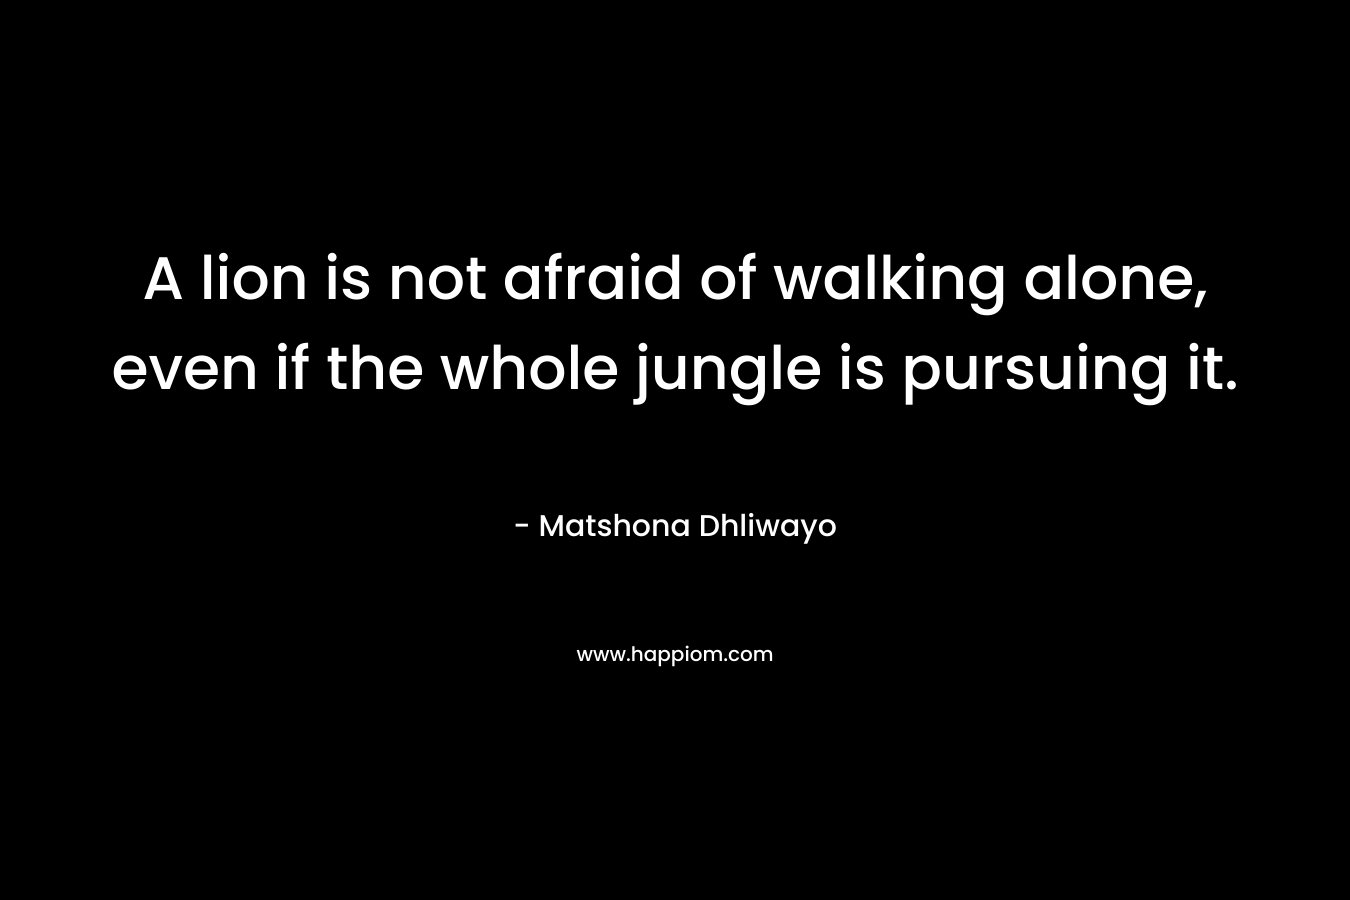 A lion is not afraid of walking alone, even if the whole jungle is pursuing it.